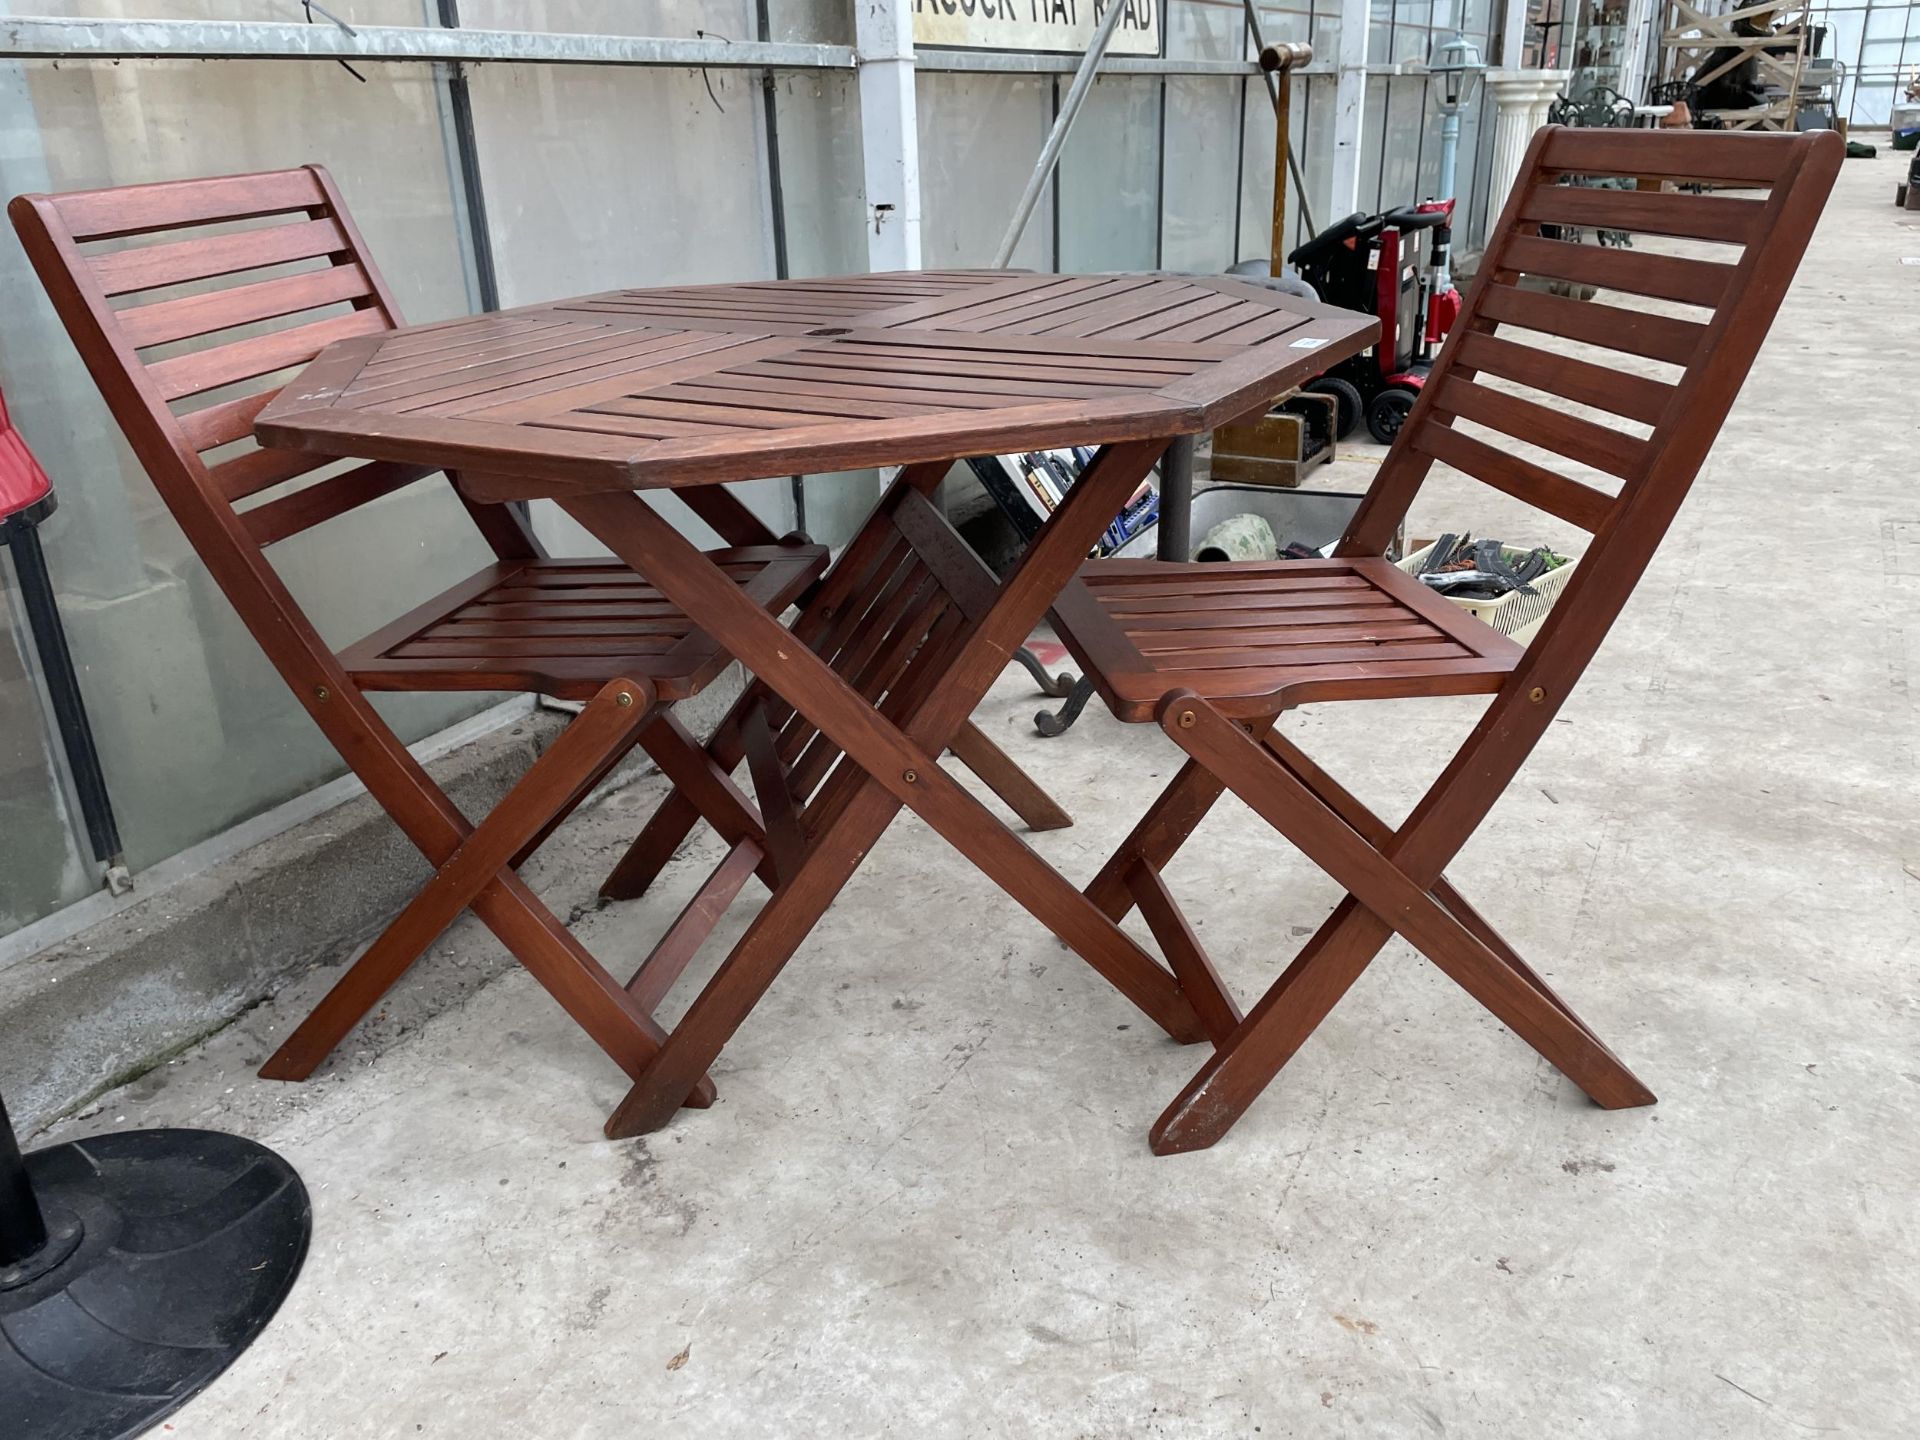 A WOODEN FOLDING PATIO TABLE AND TWO CHAIRS - Image 2 of 3